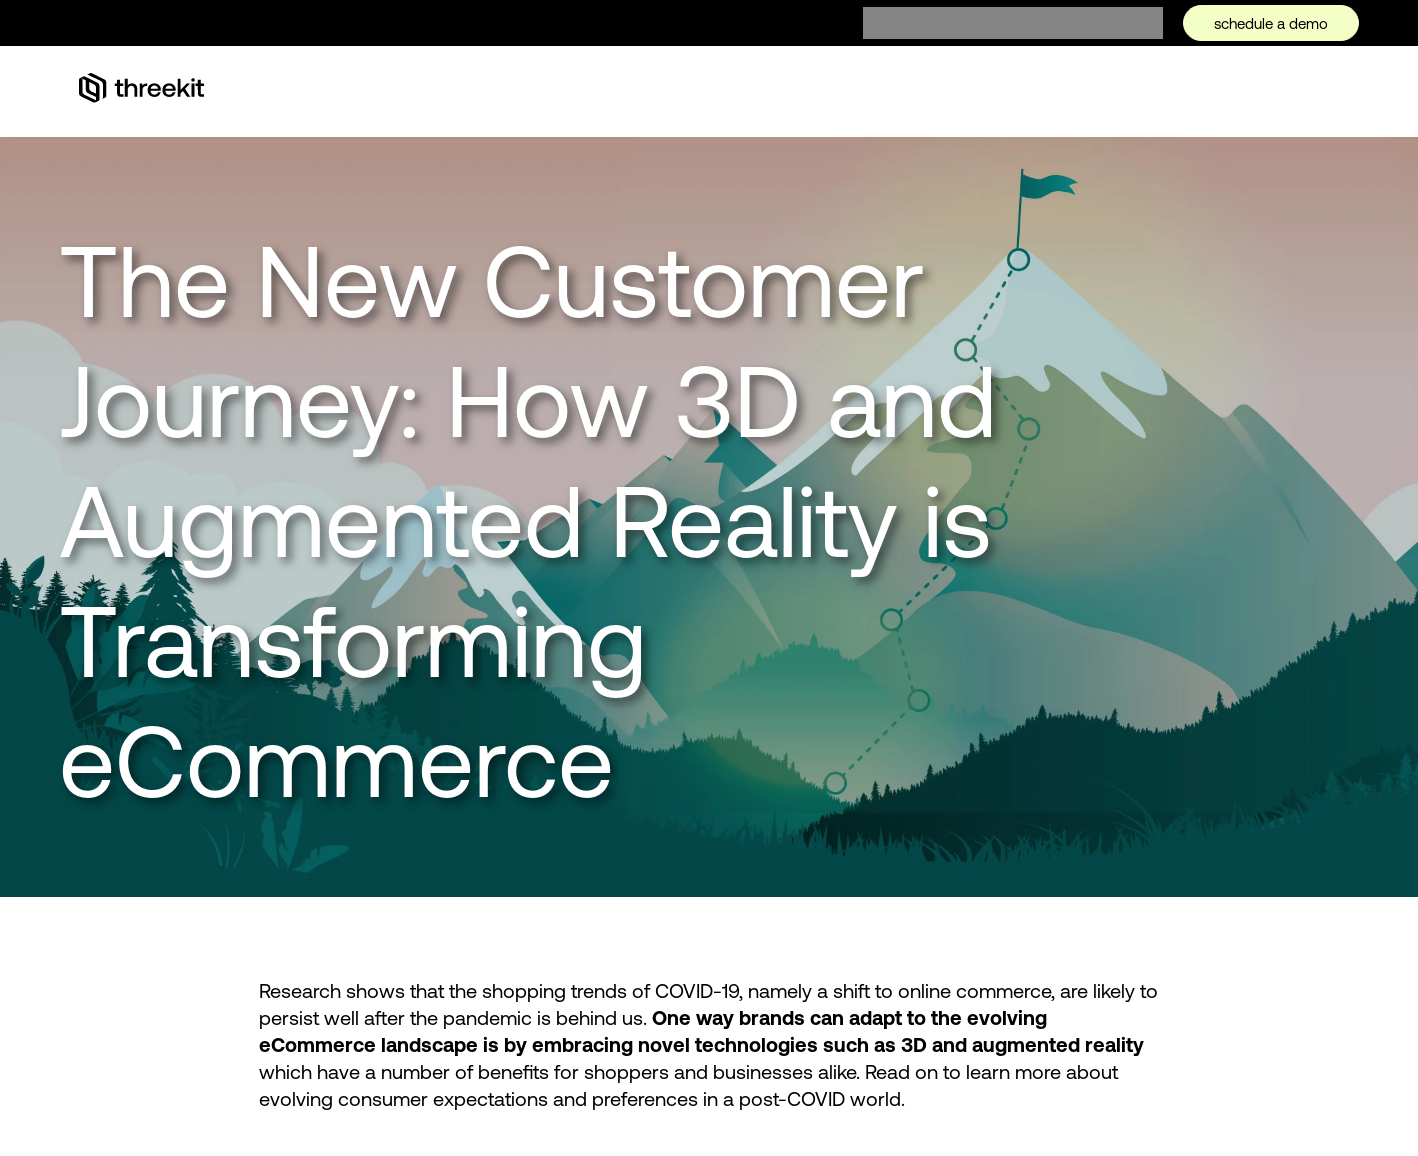 The New Customer Journey: How 3D and Augmented Reality is Transforming eCommerce